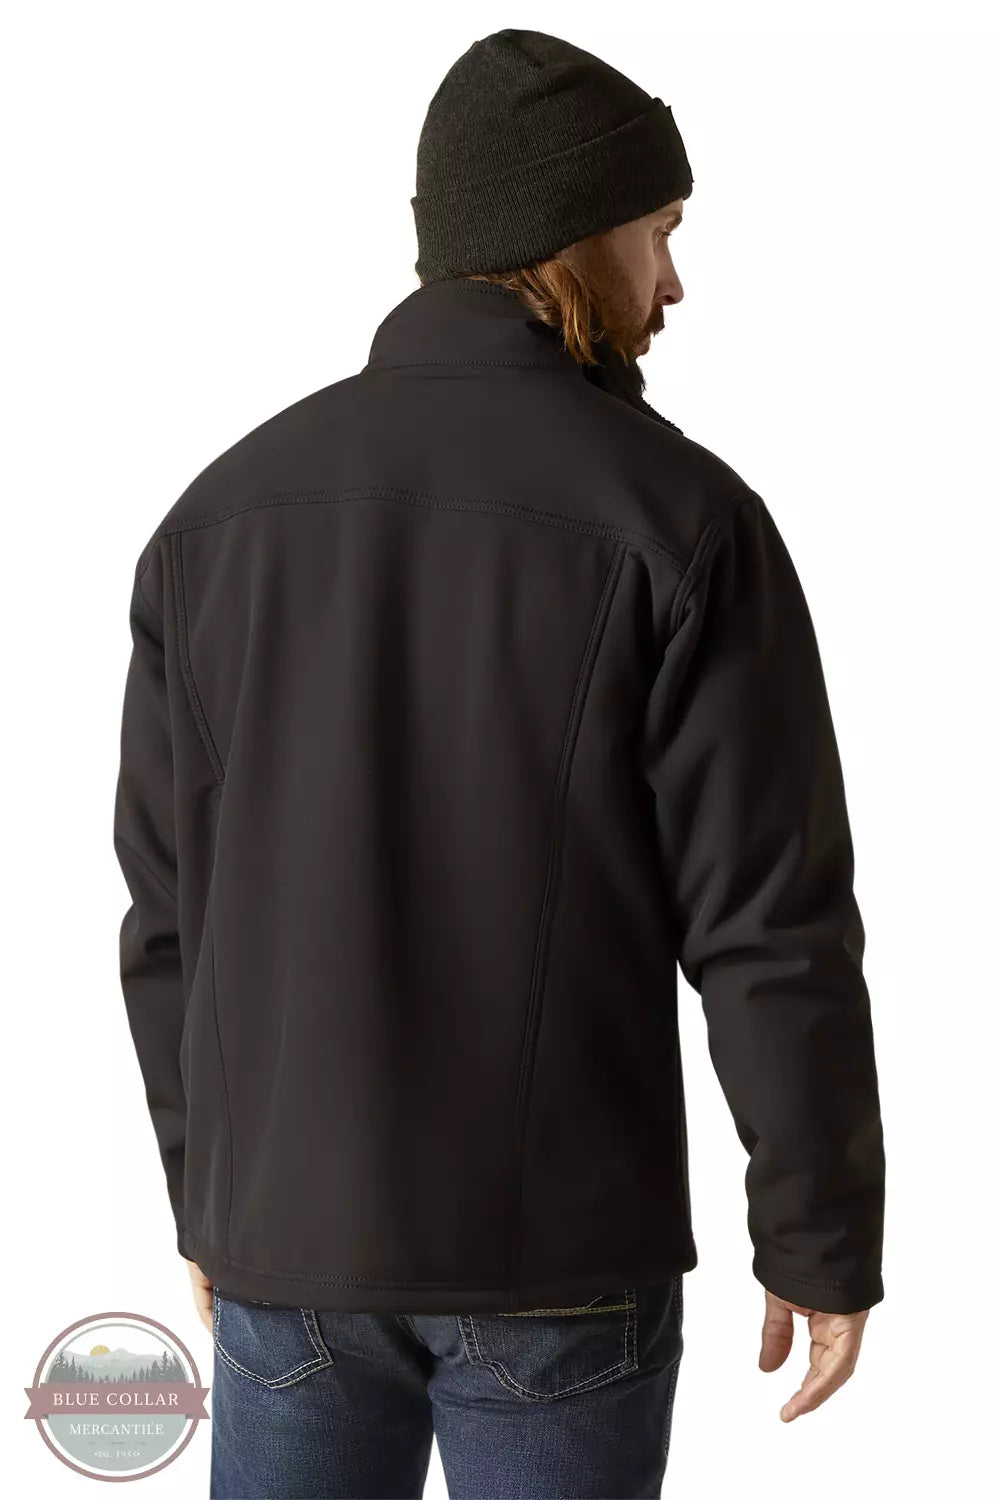 Ariat 10046456 Vernon Sherpa 2.0 Jacket in Black Back View